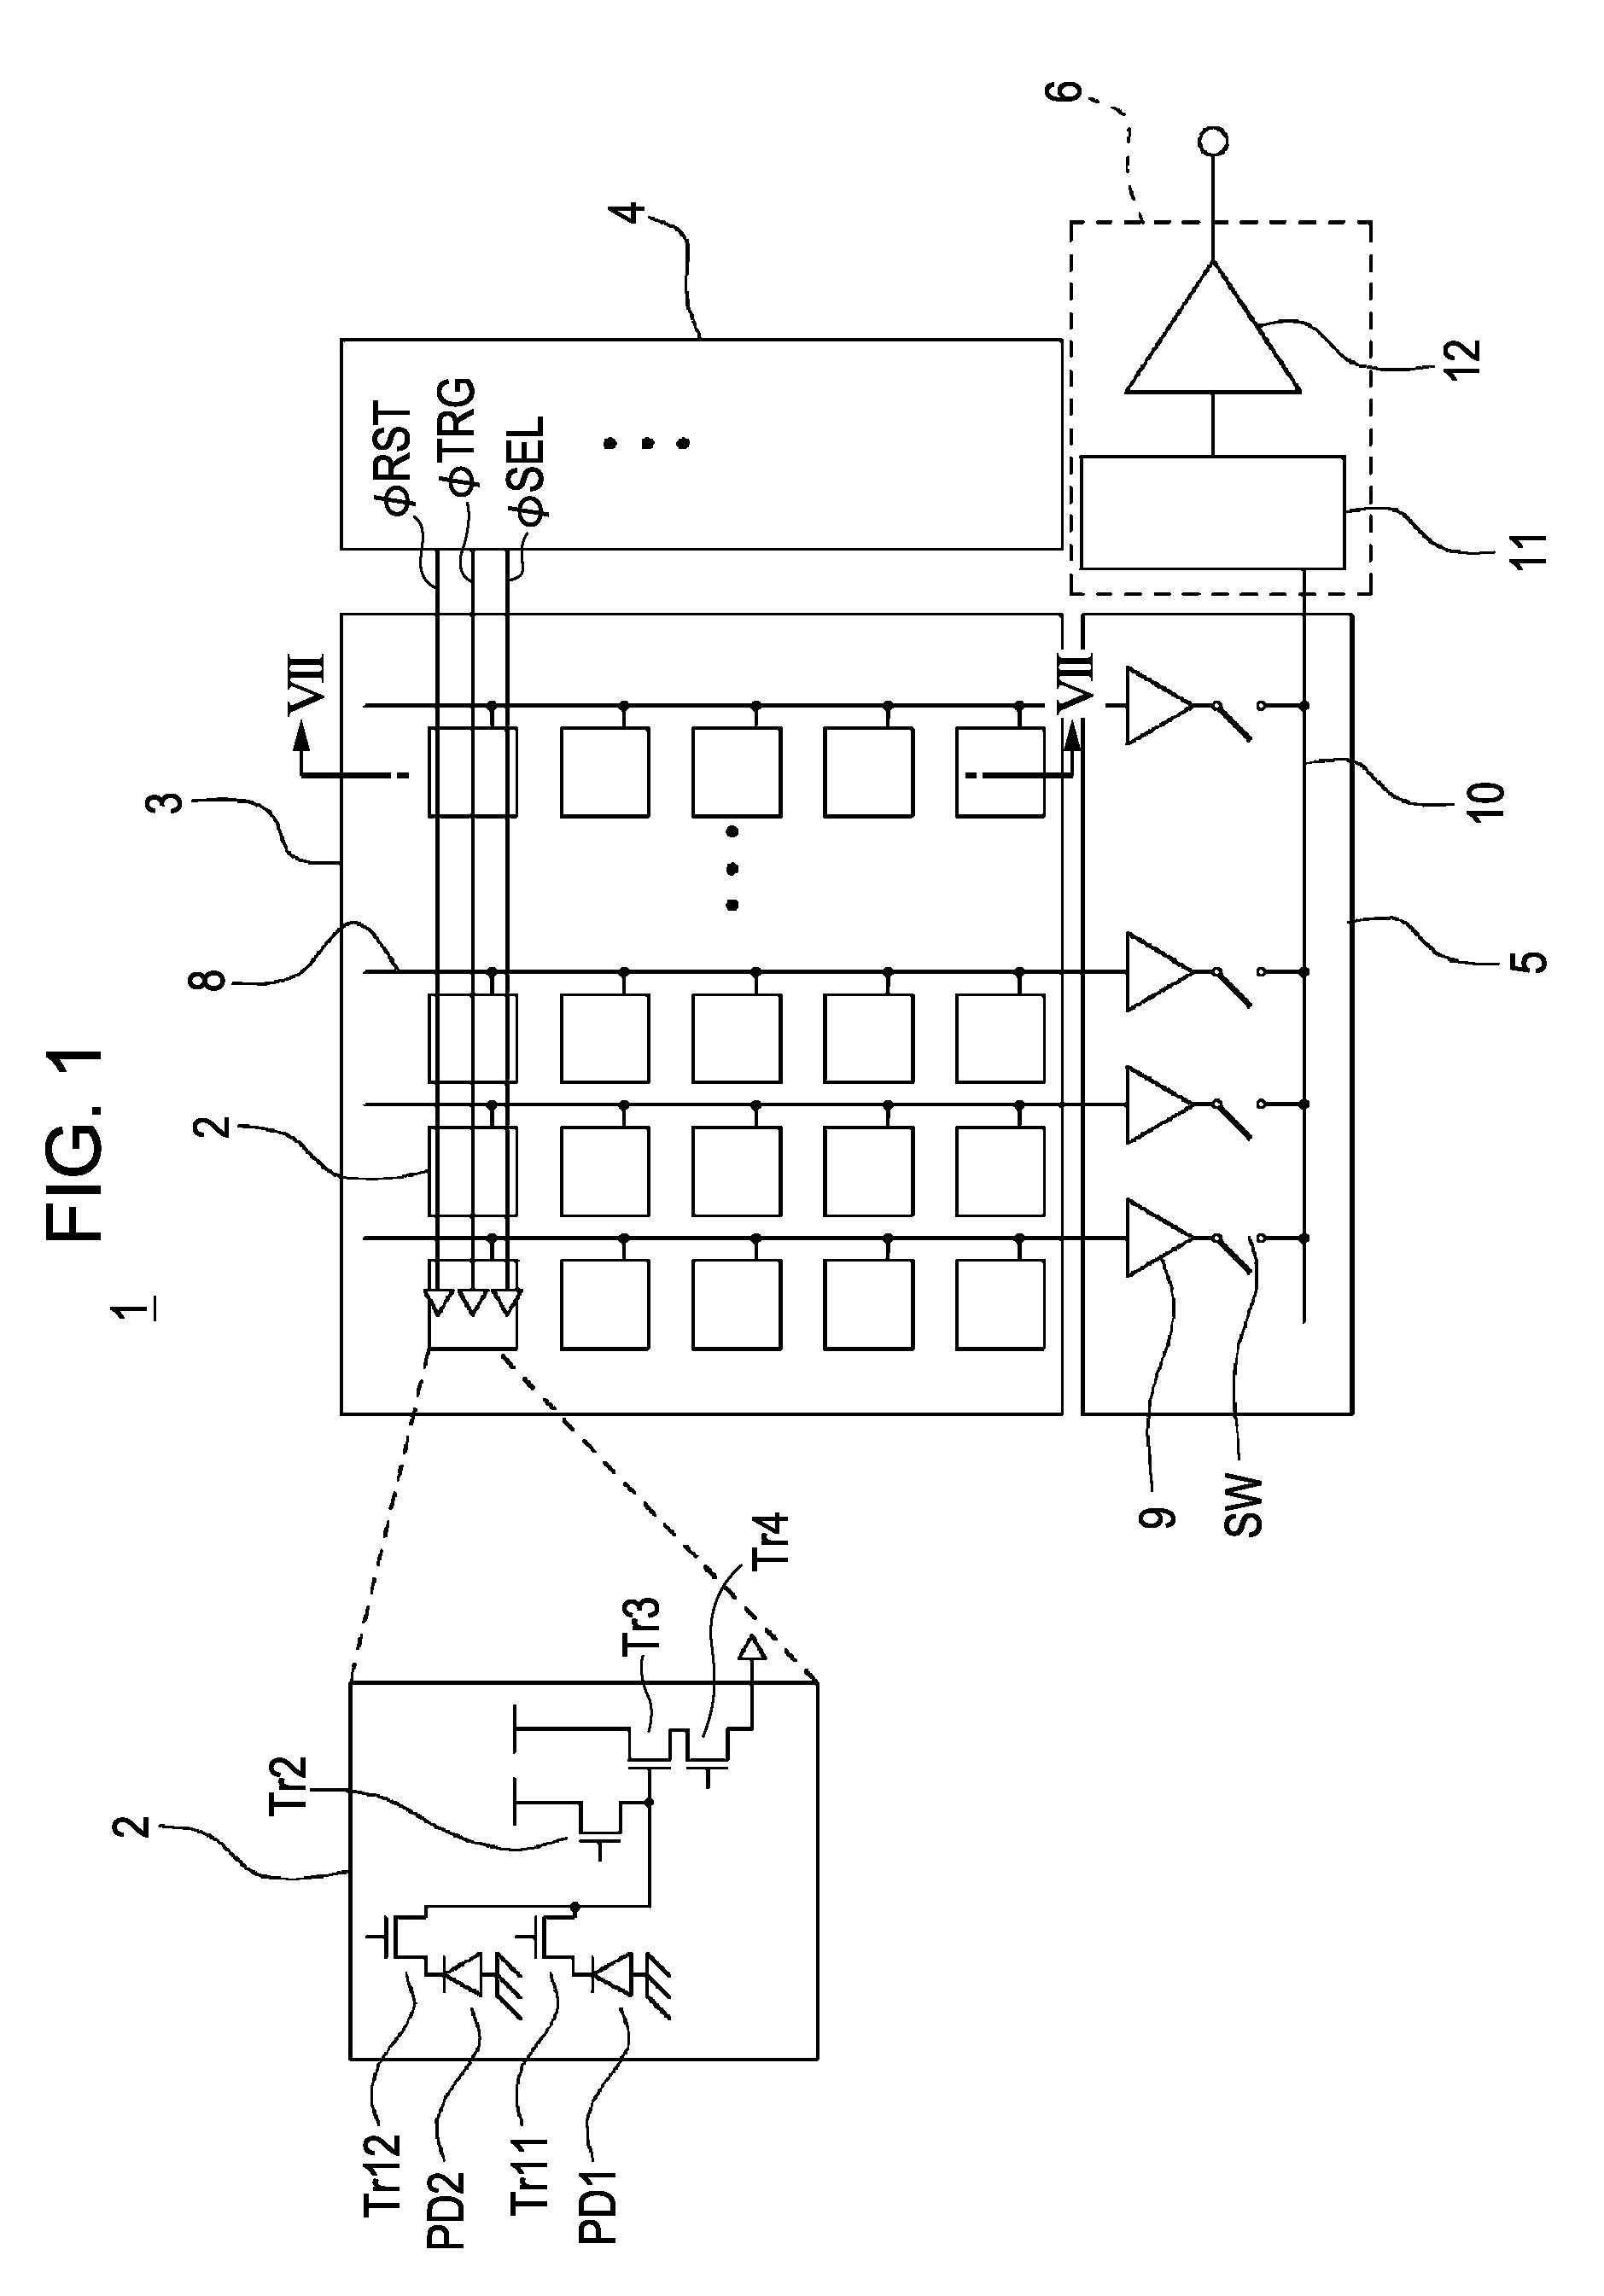 Solid-state imaging device with on chip lenses with adjust characteristics to render pixel output sensitivities more uniform